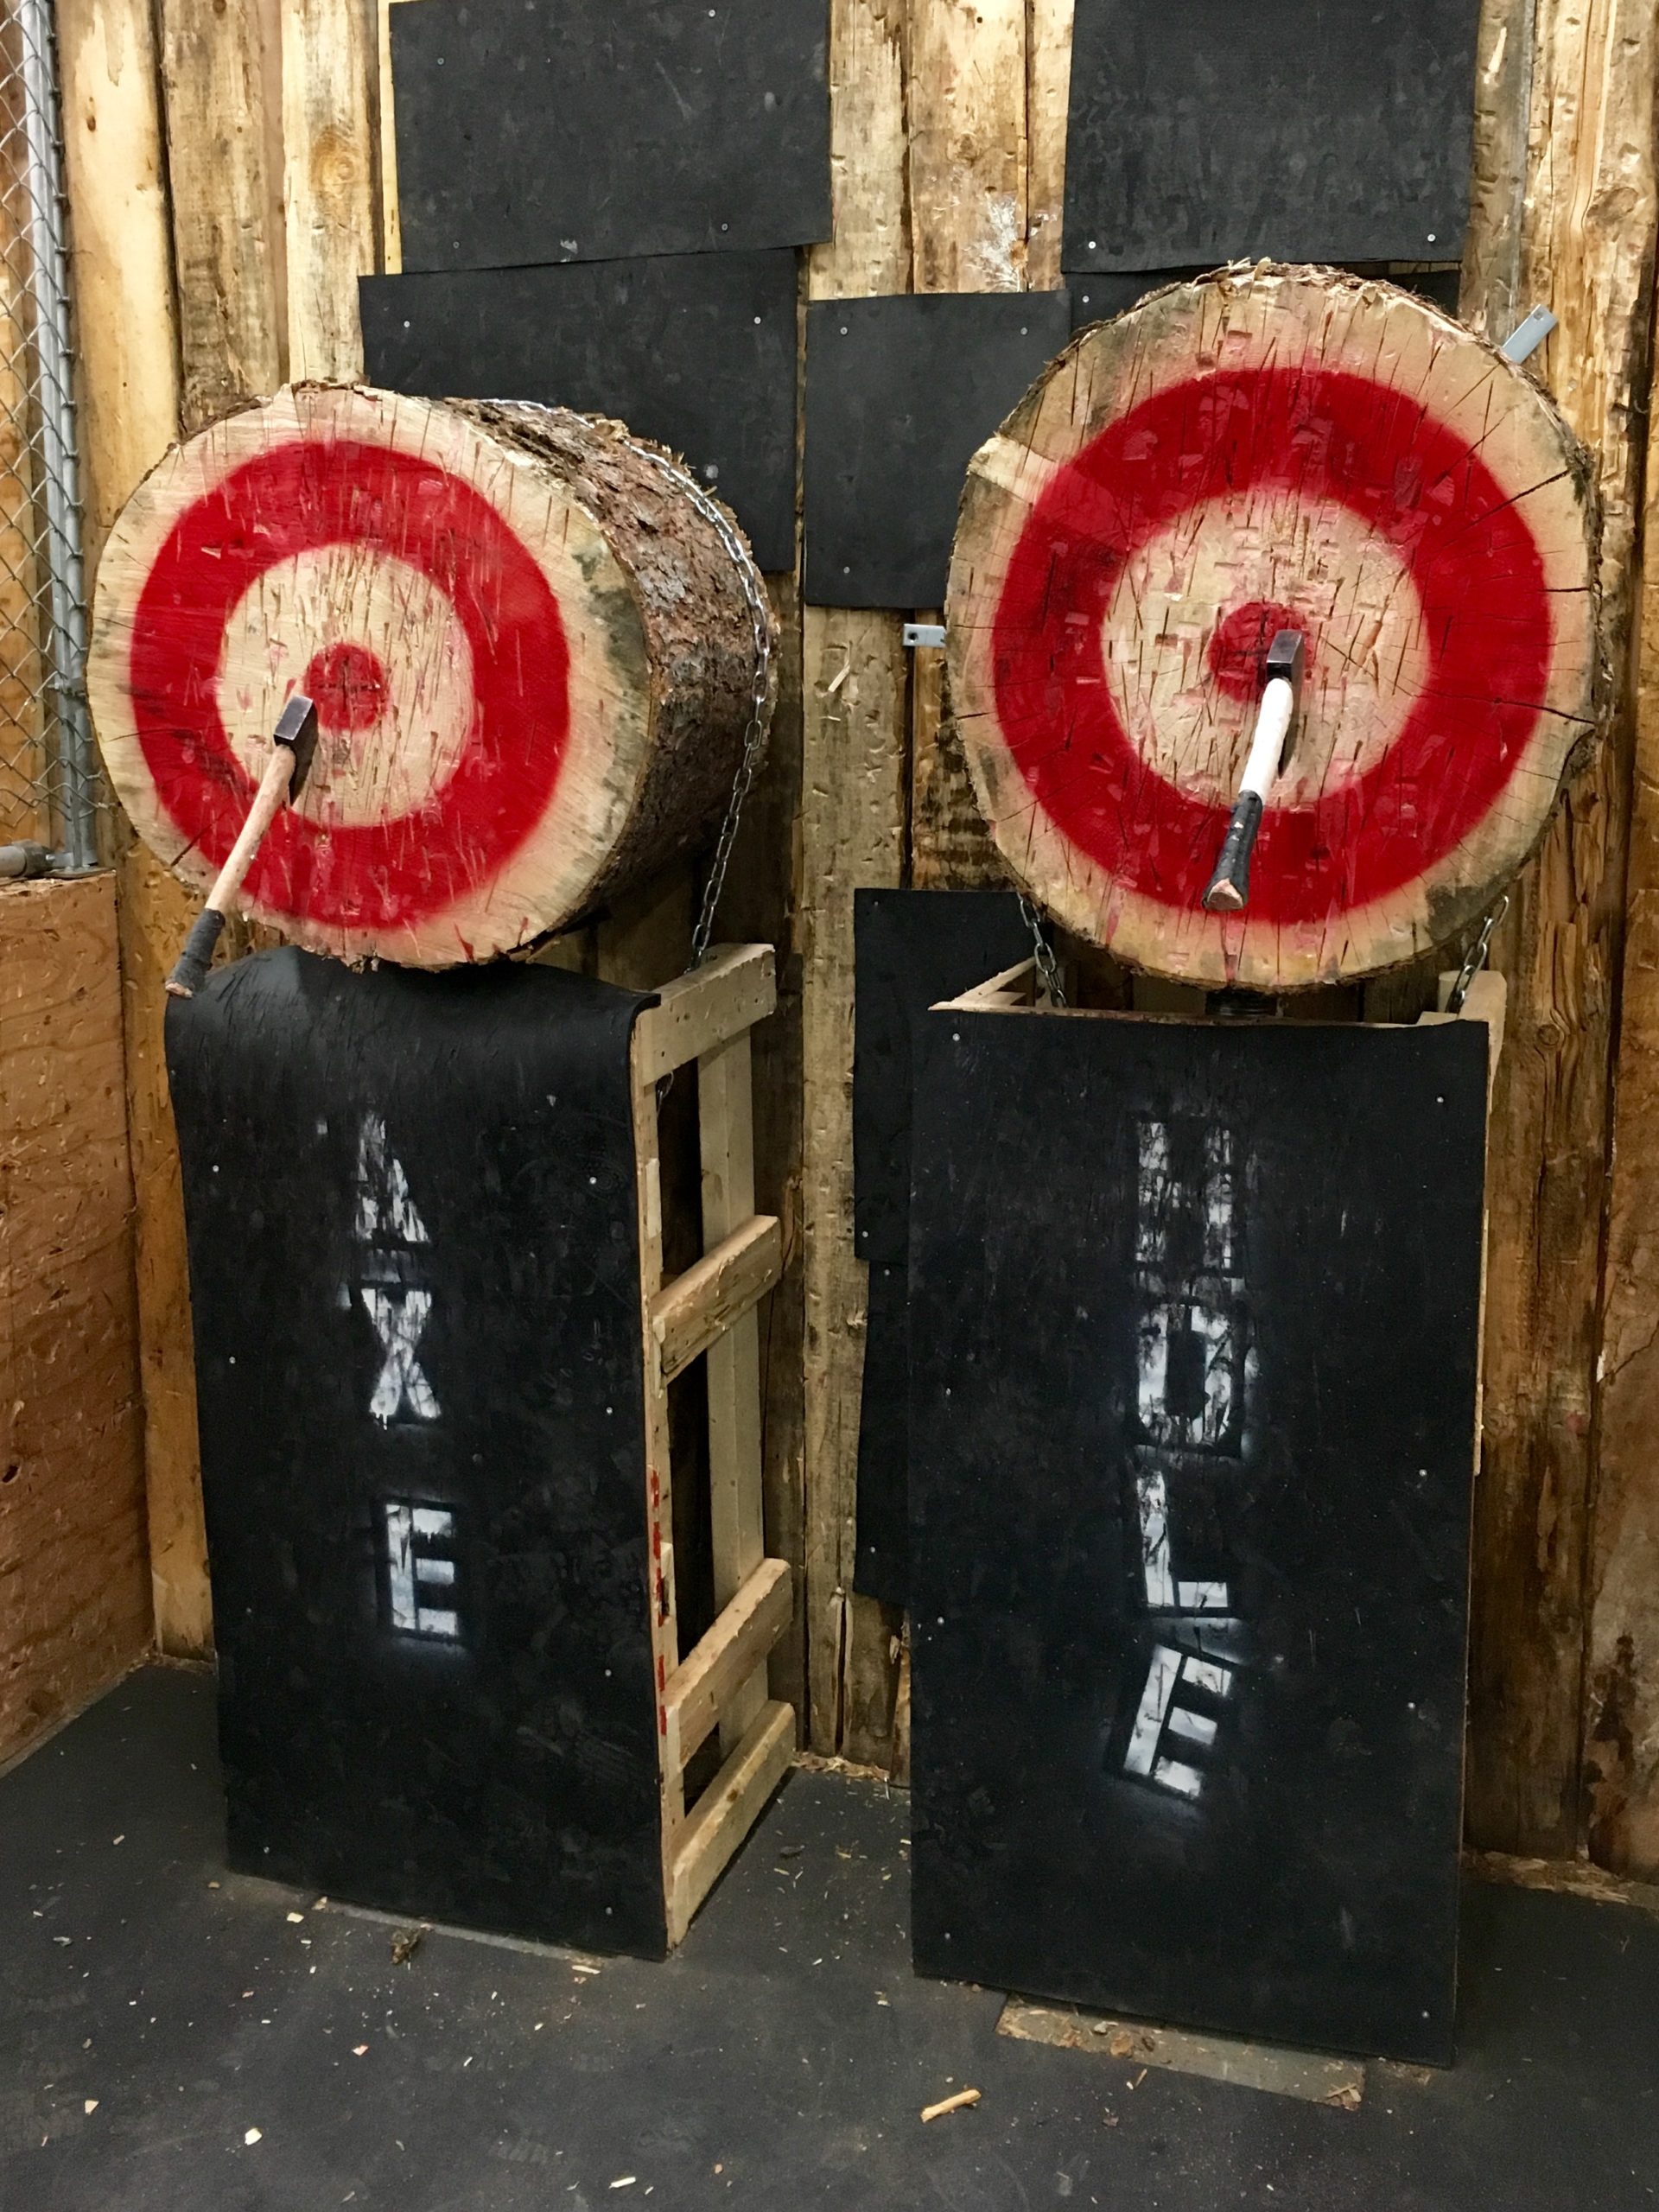 Two axes on two targets